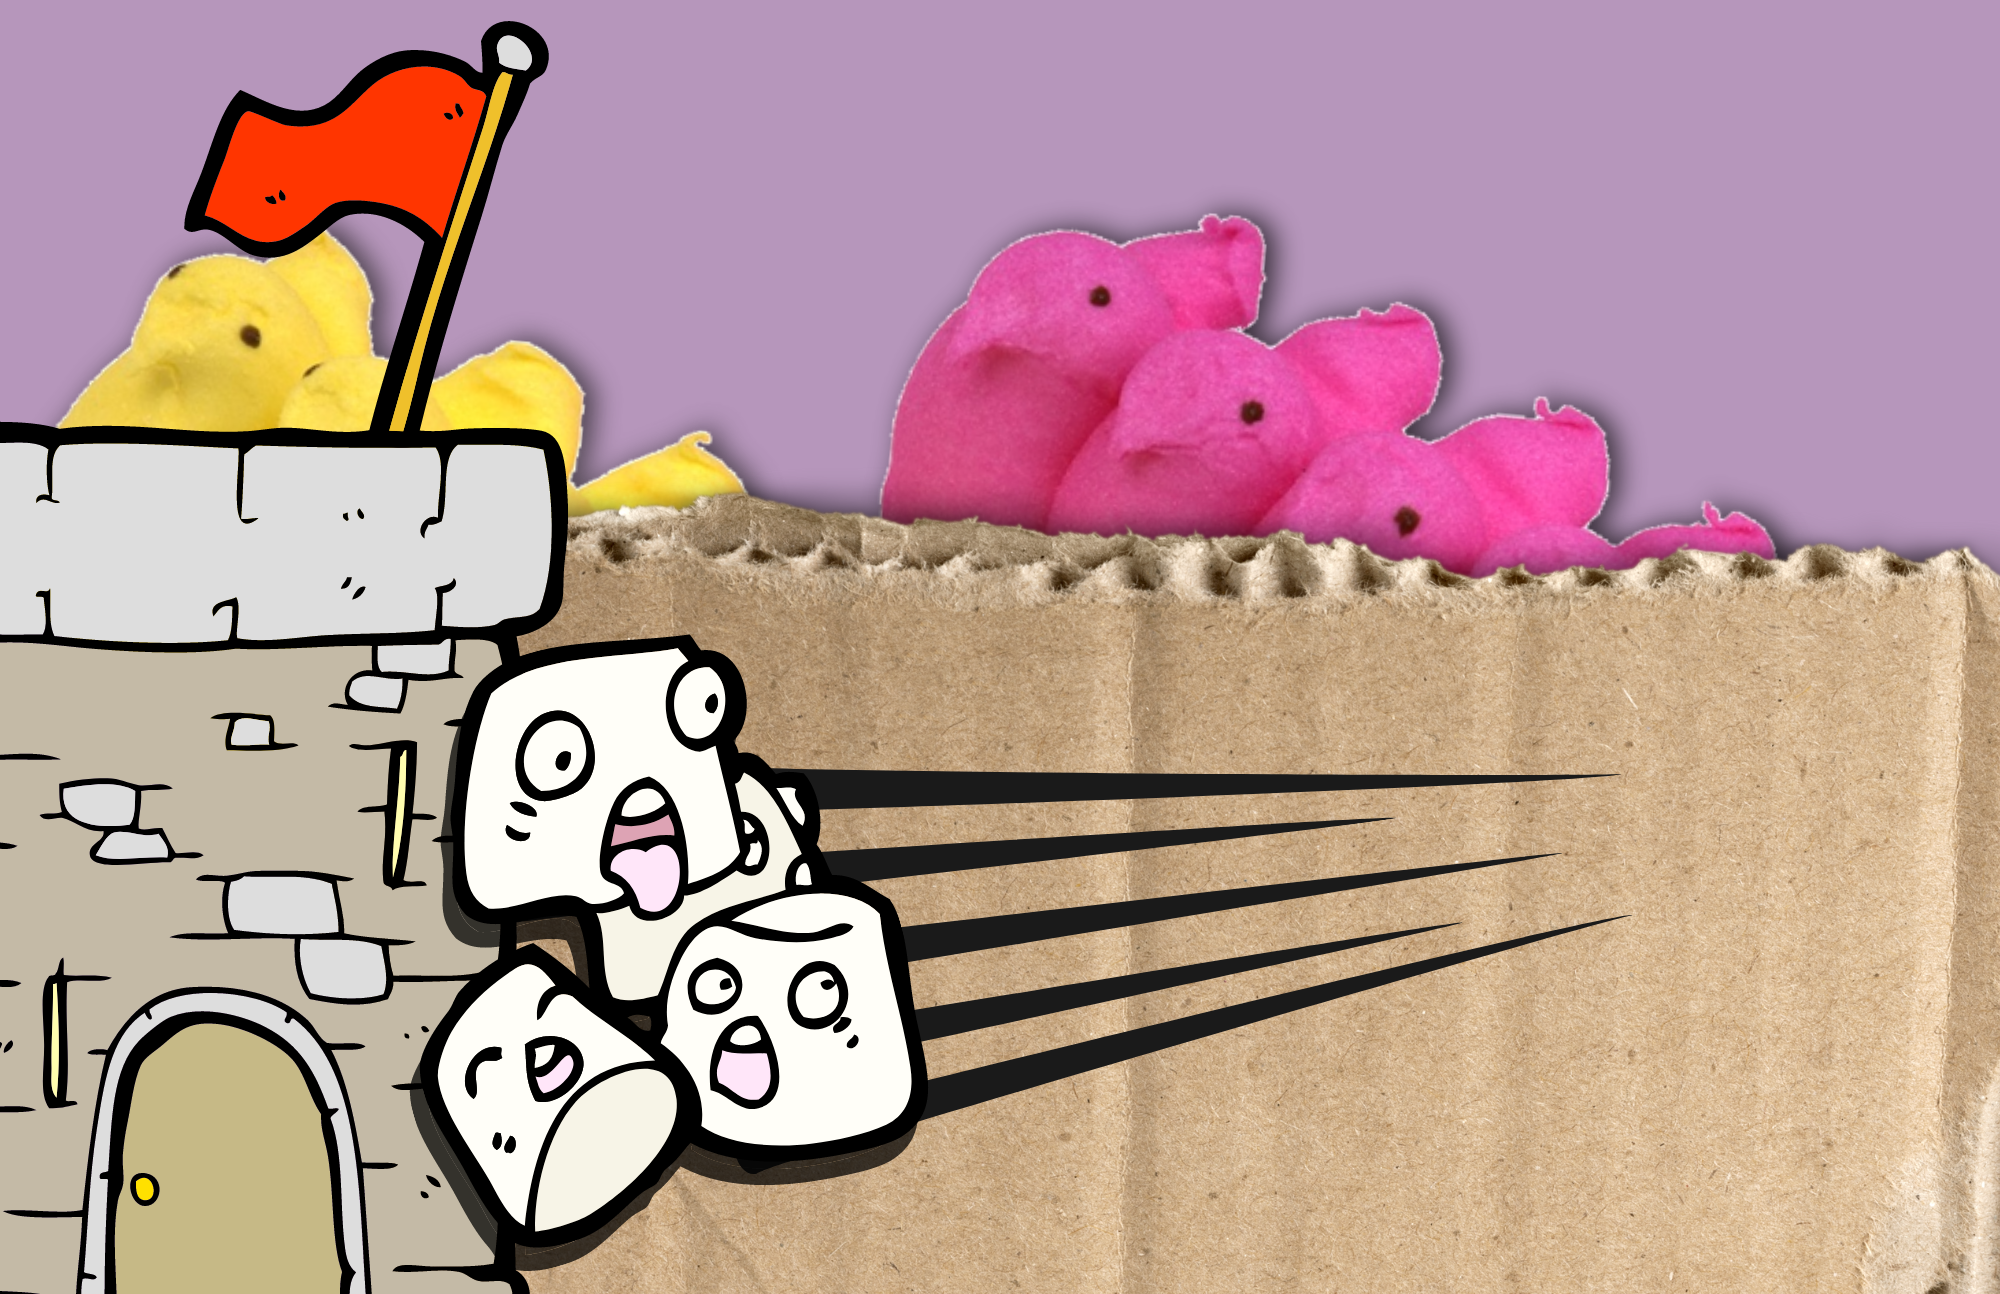 Cartoon marshmallows being thrown at a cardboard fort with marshmallow peeps behind it